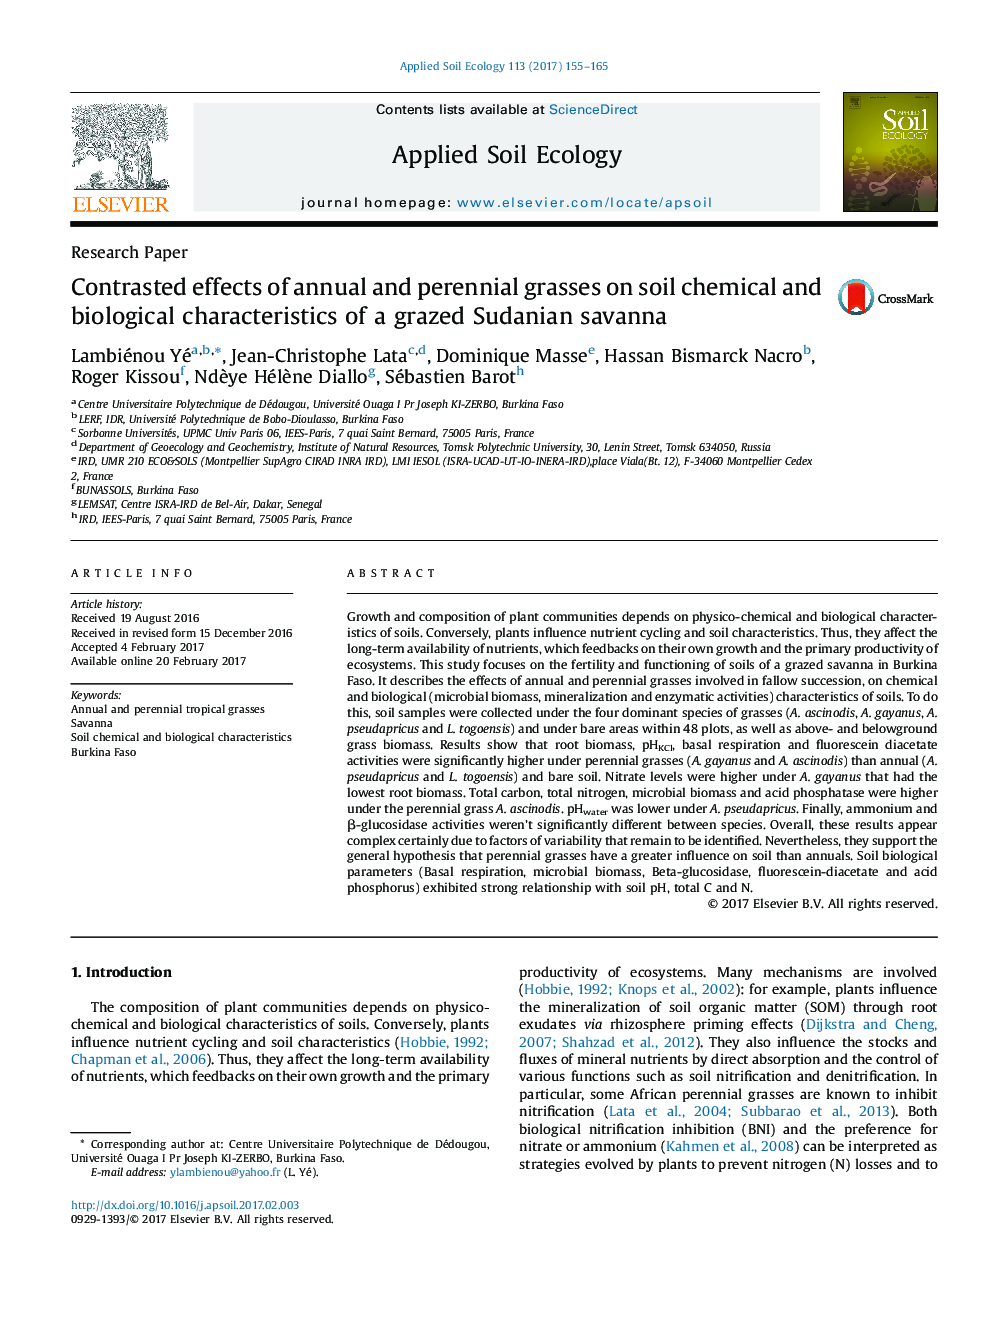 Research PaperContrasted effects of annual and perennial grasses on soil chemical and biological characteristics of a grazed Sudanian savanna